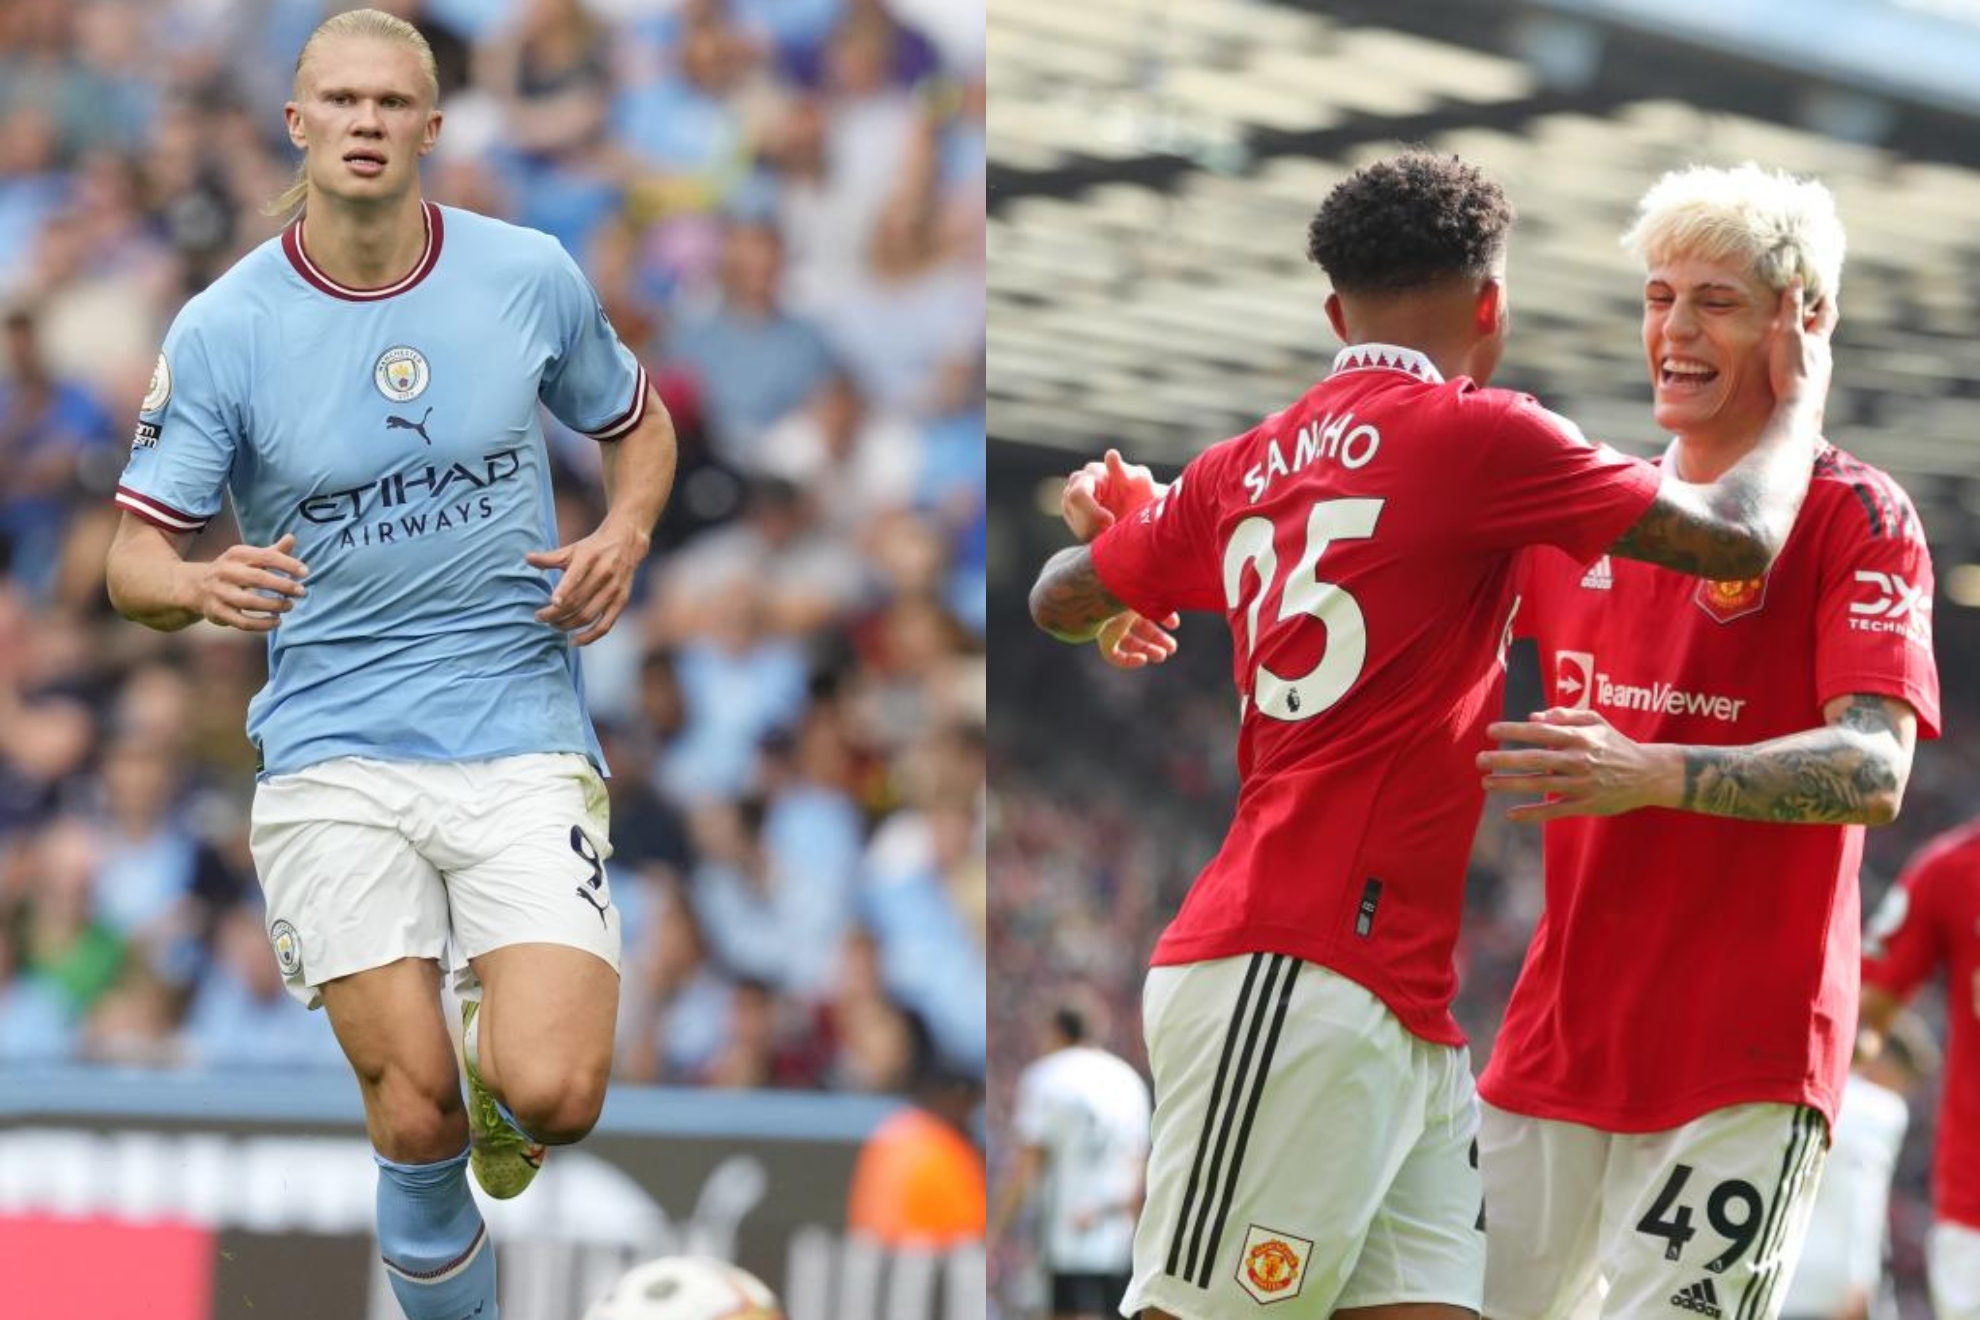 Posible alineaci�n de Manchester City y Manchester United